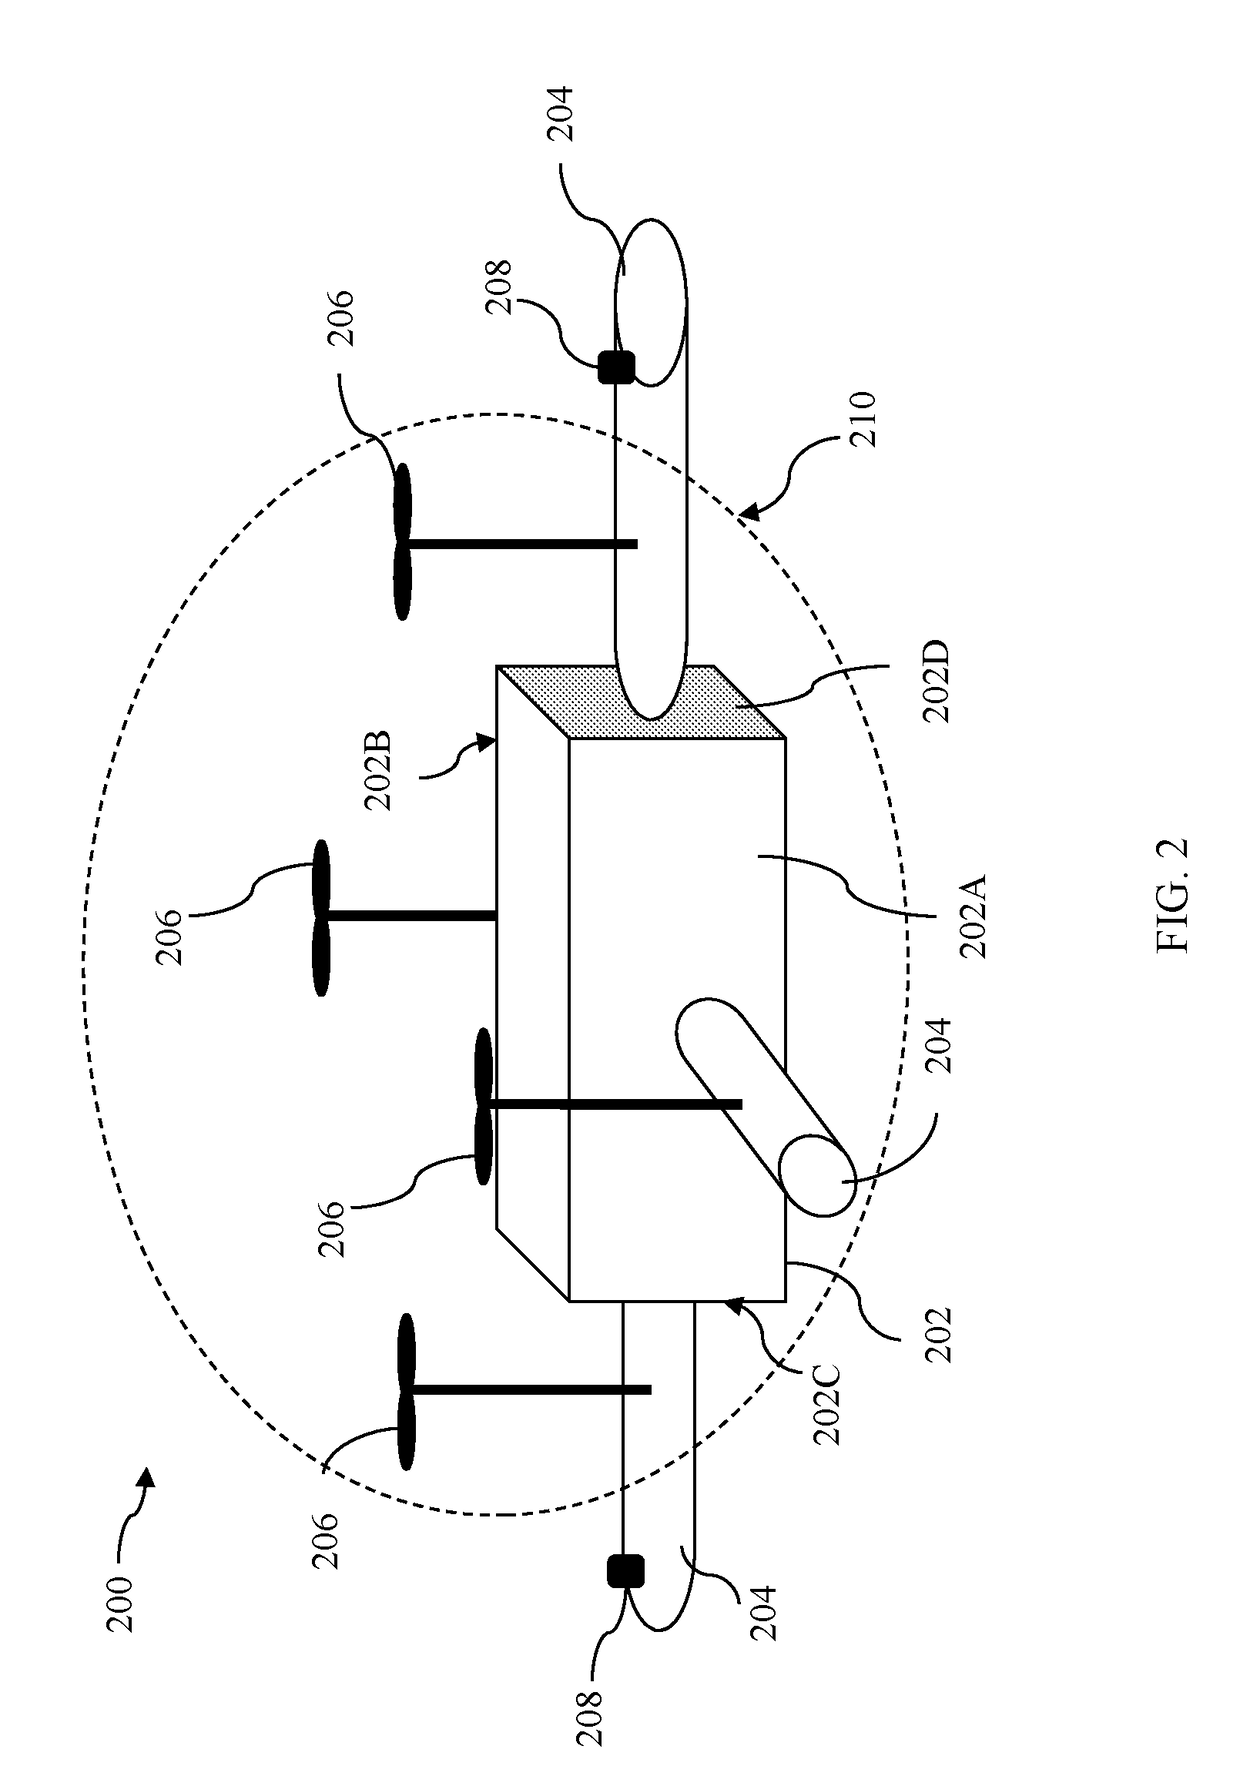 Systems and methods for UAV sensor placement